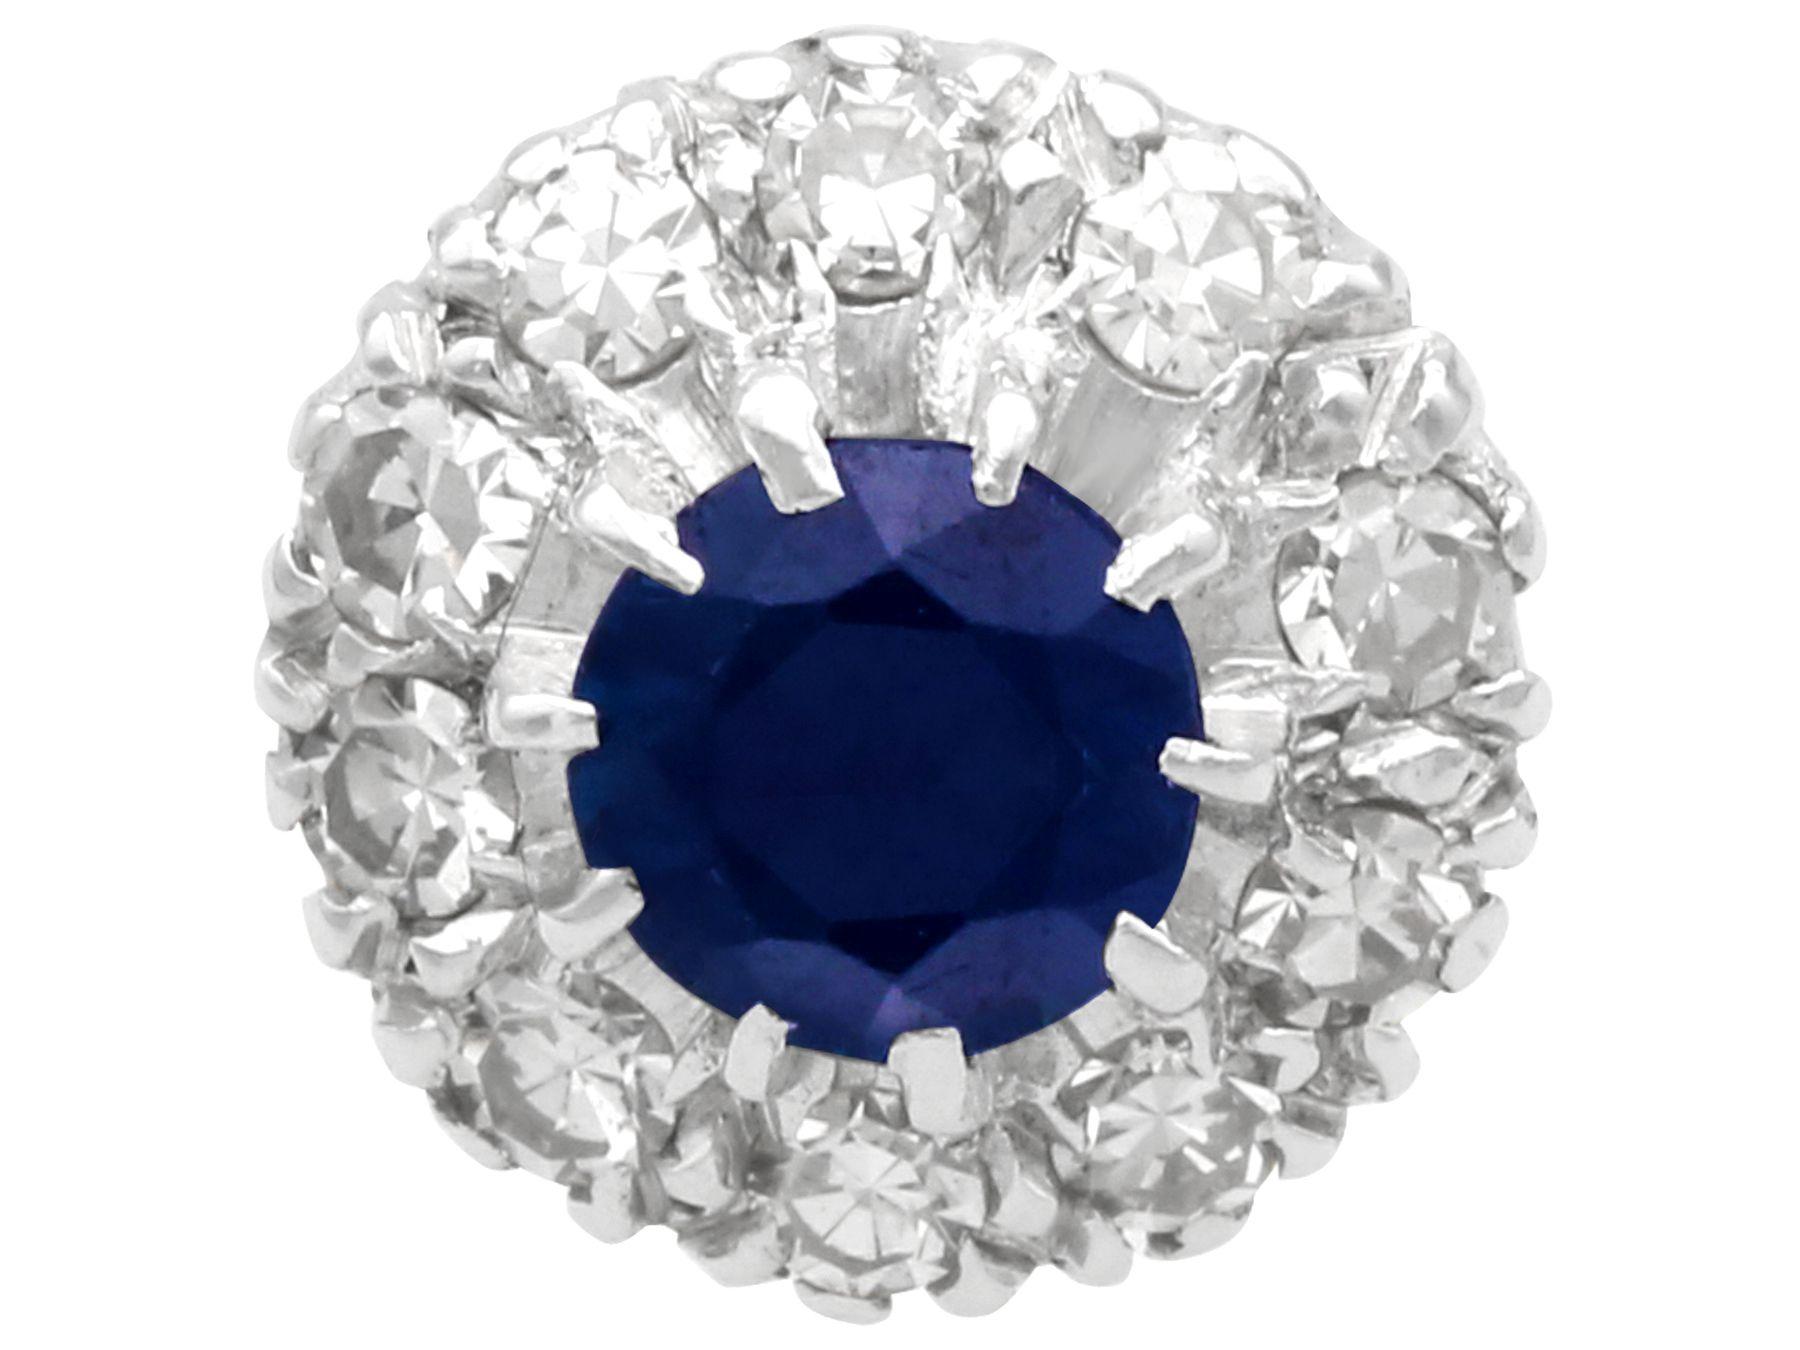 A fine and impressive 0.56 carat sapphire and 0.35 carat diamond, 18 carat white gold cluster earrings; part of our diverse gemstone jewellery collections.

These fine and impressive vintage sapphire earrings have been crafted in 18ct white